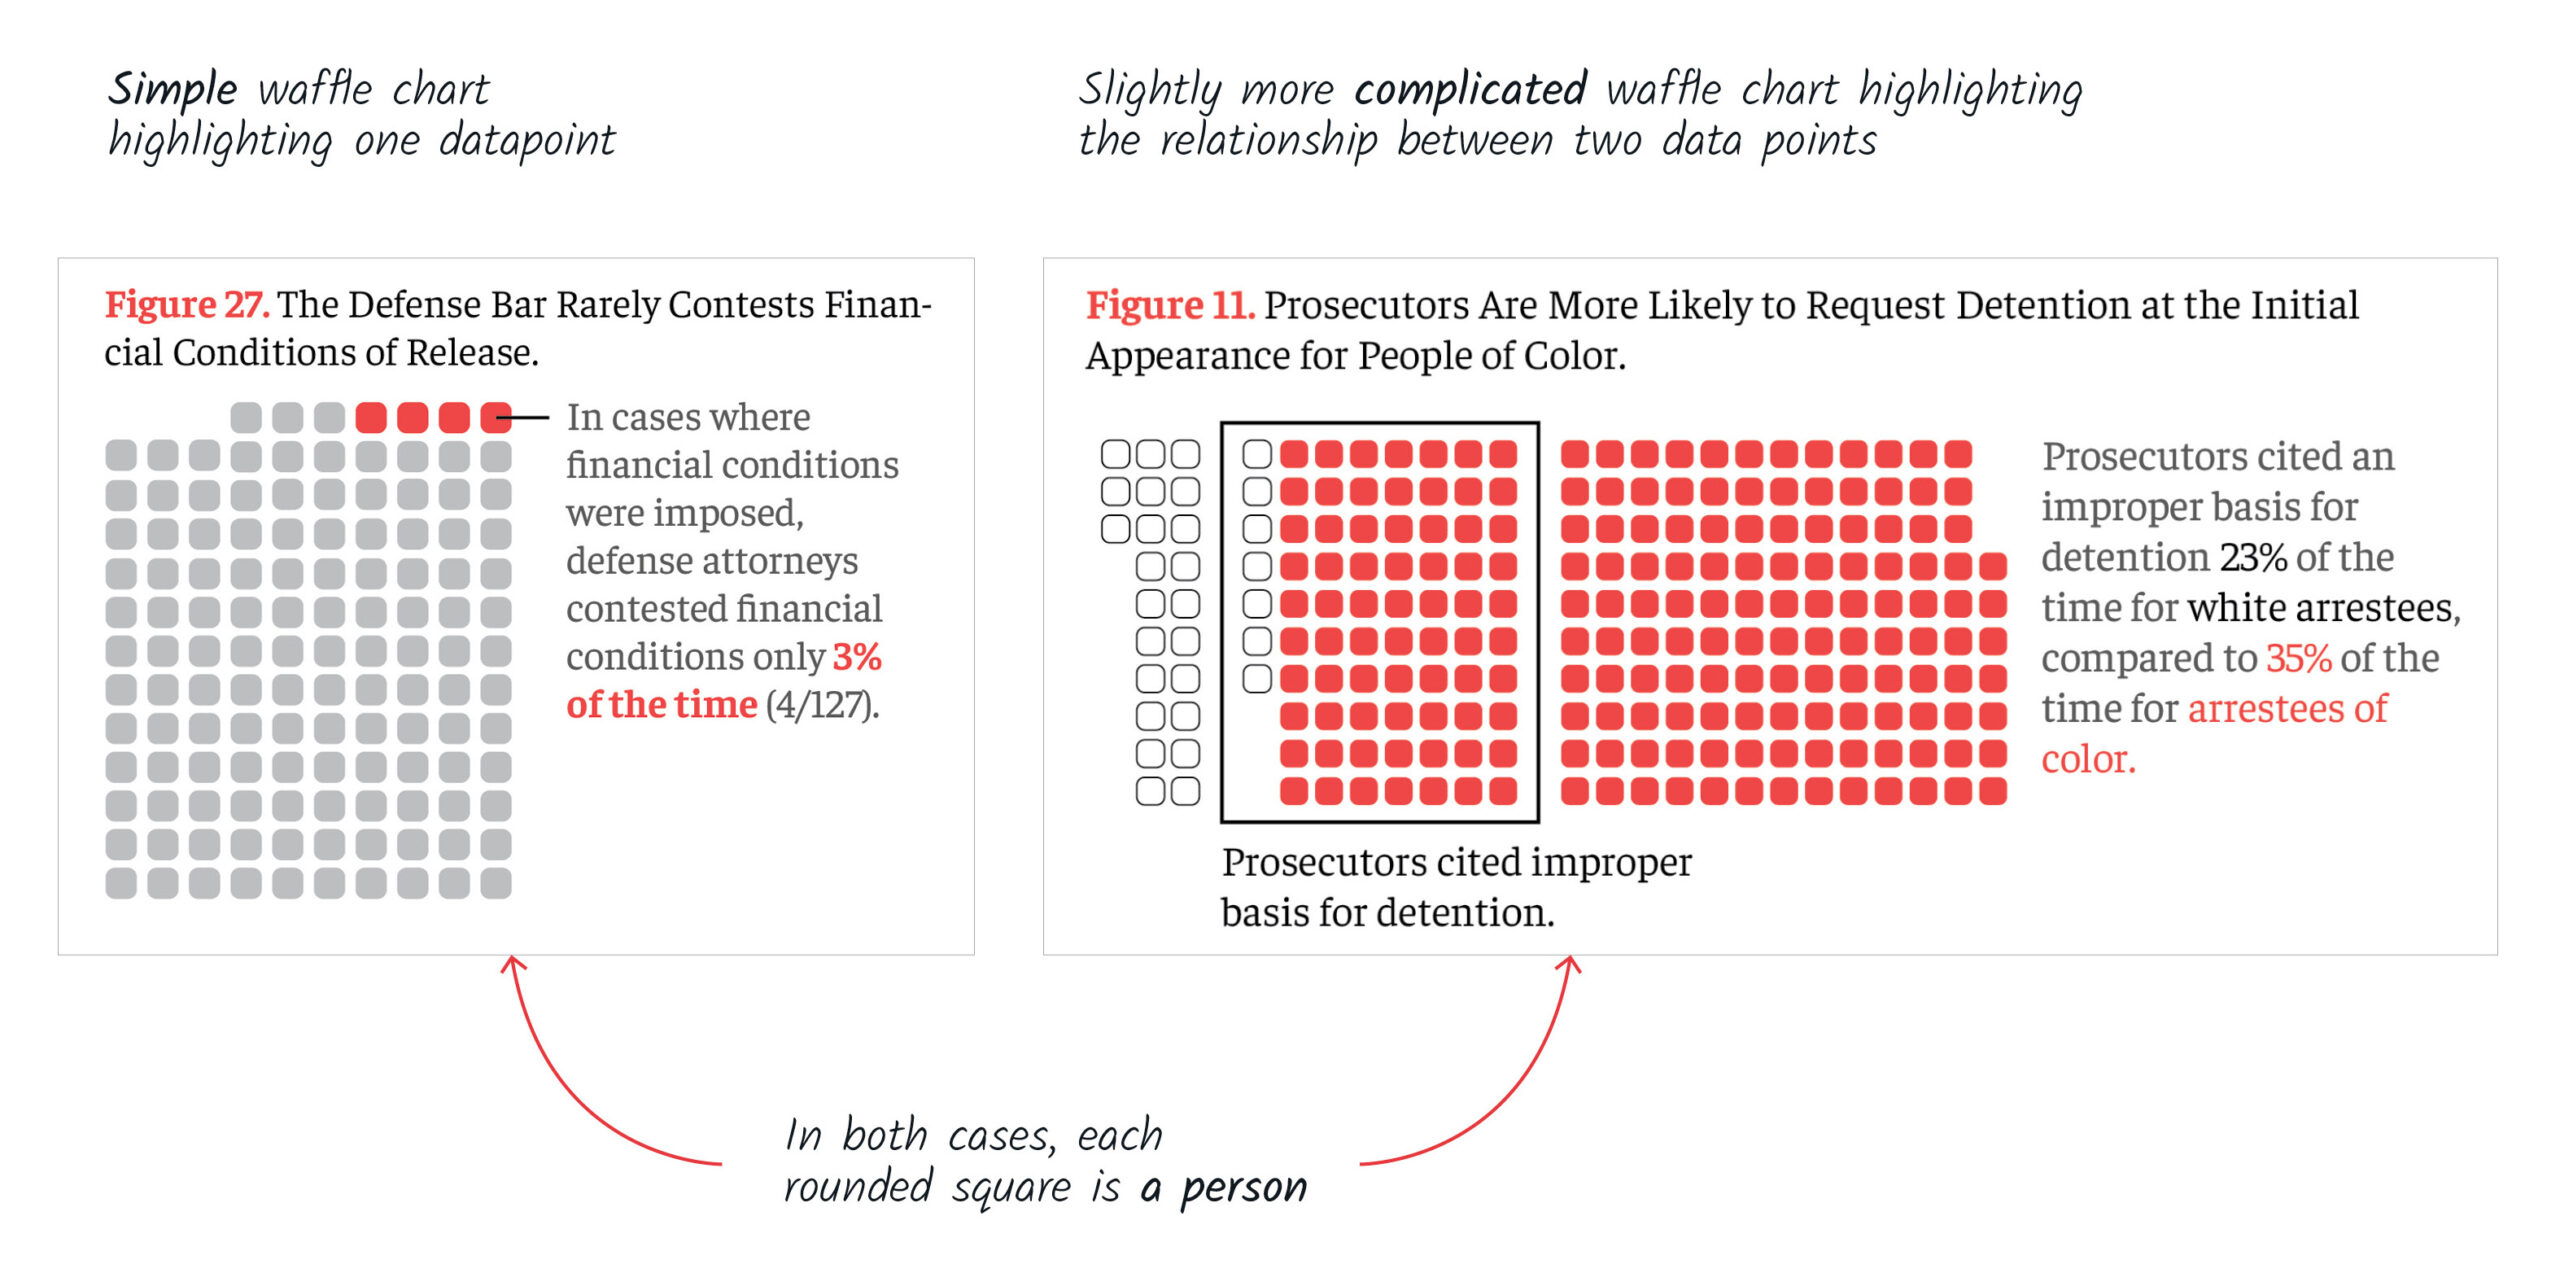 Two examples of waffle charts used in the report, a simple one emphasizing one datapoint and a more complicated one highlighting the relationship between two data points.